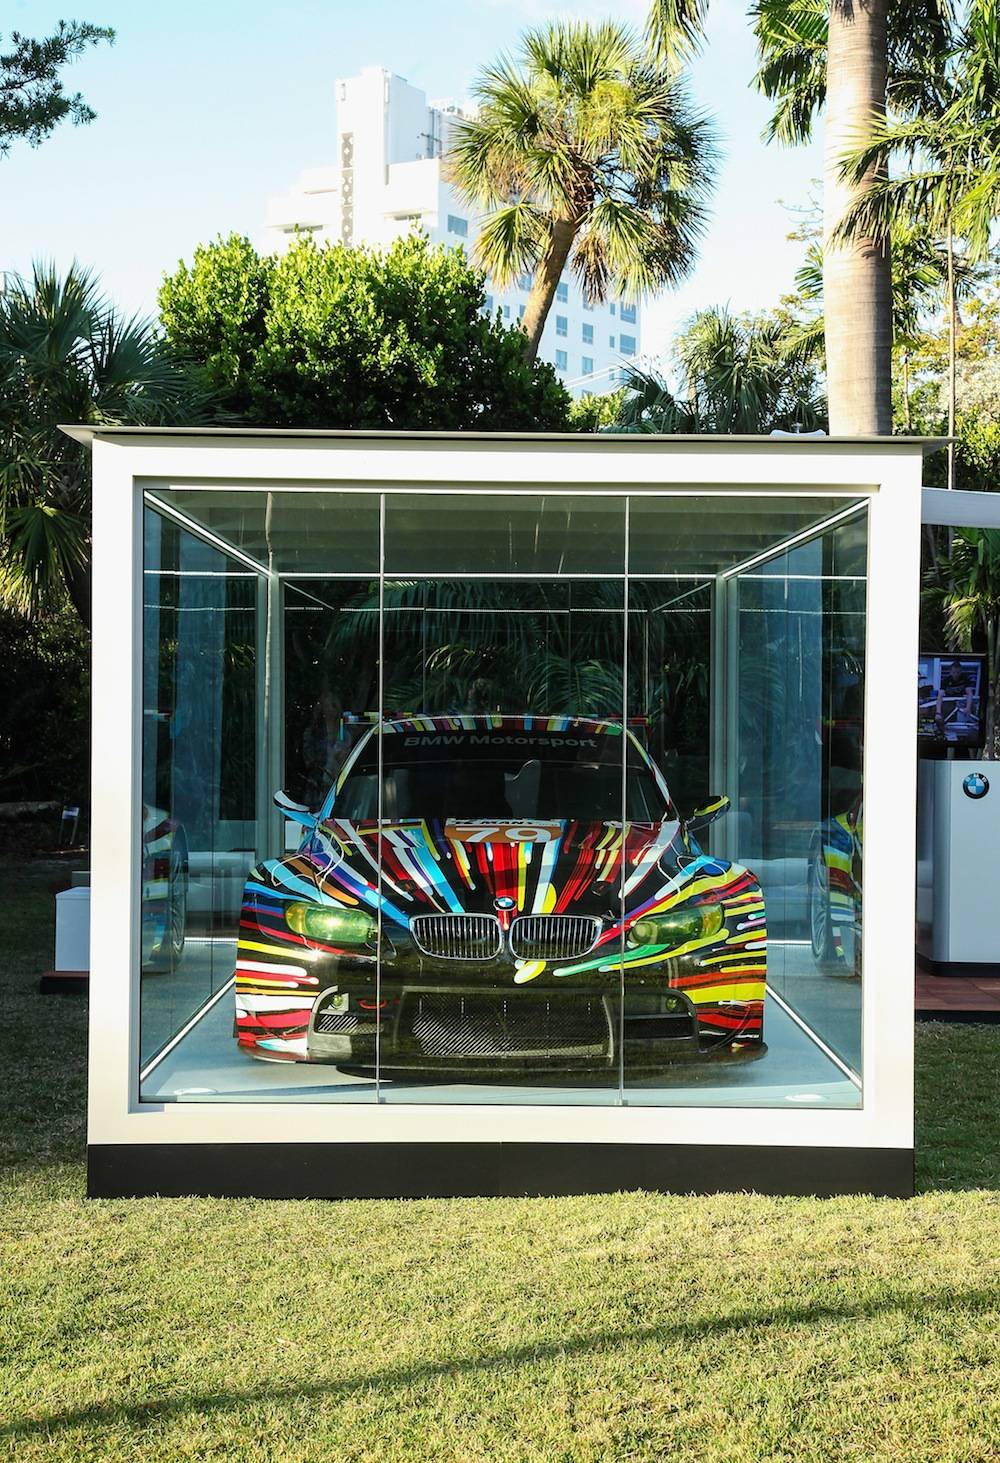 Jeff Koons BMW Art Car US Premiere And Andy Warhol BMW Art Car Exhibition At Art Basel In Miami Beach